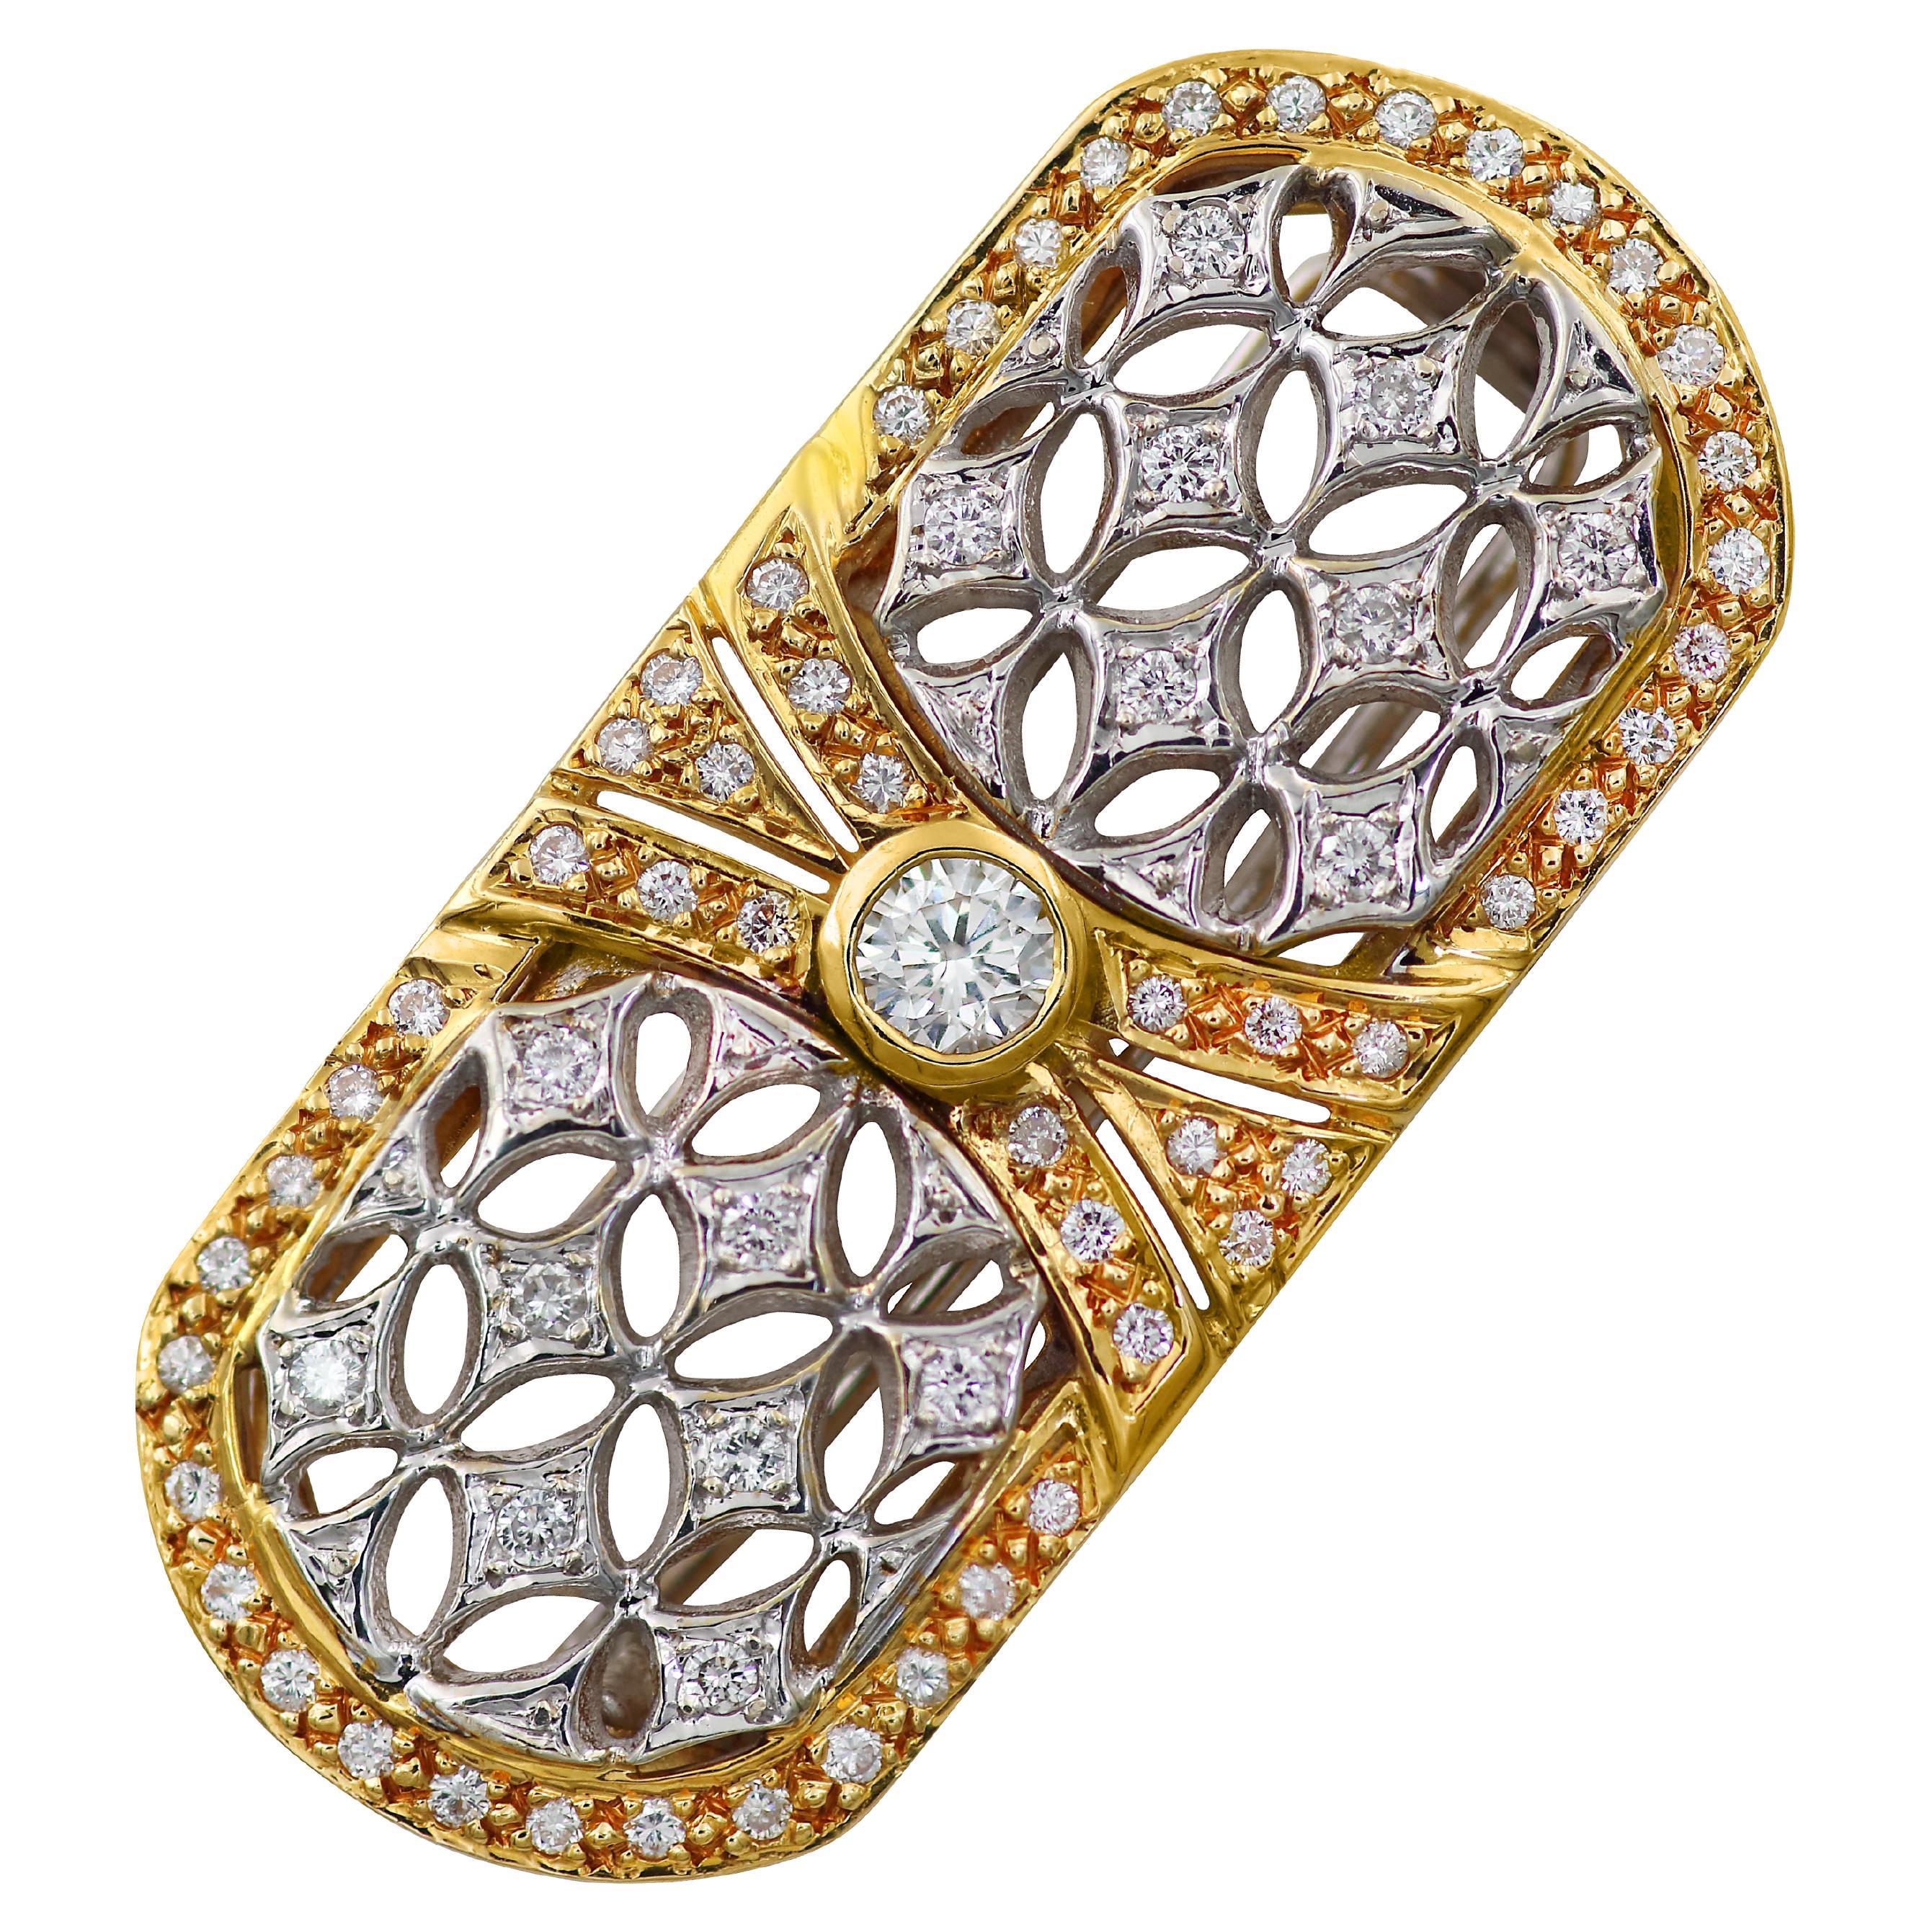 18k White and Yellow Gold Brooch with Diamonds